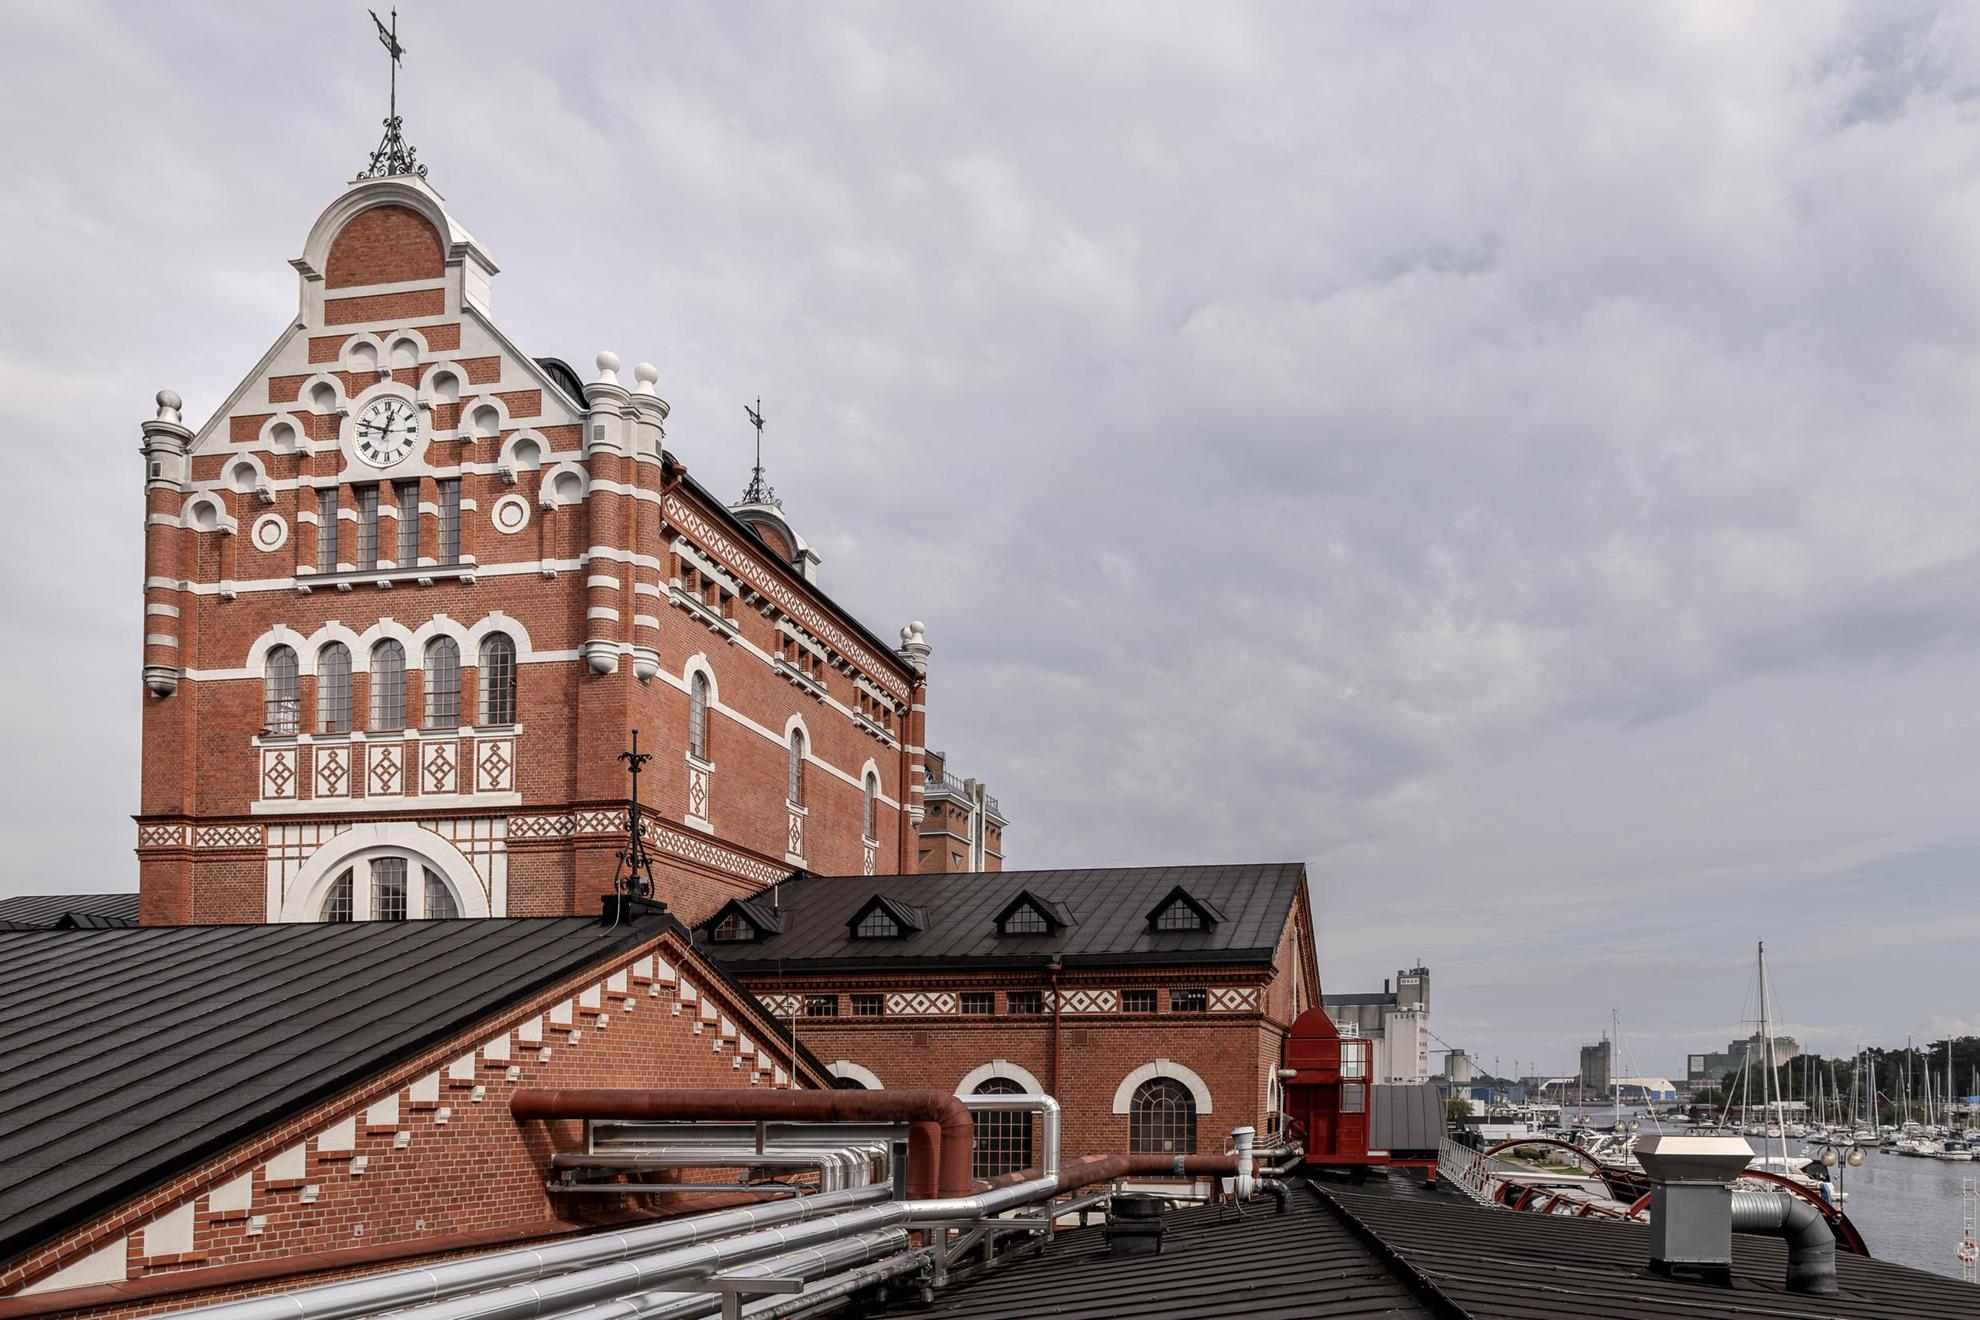 a large red brick building with white decorative features, by a harbour.